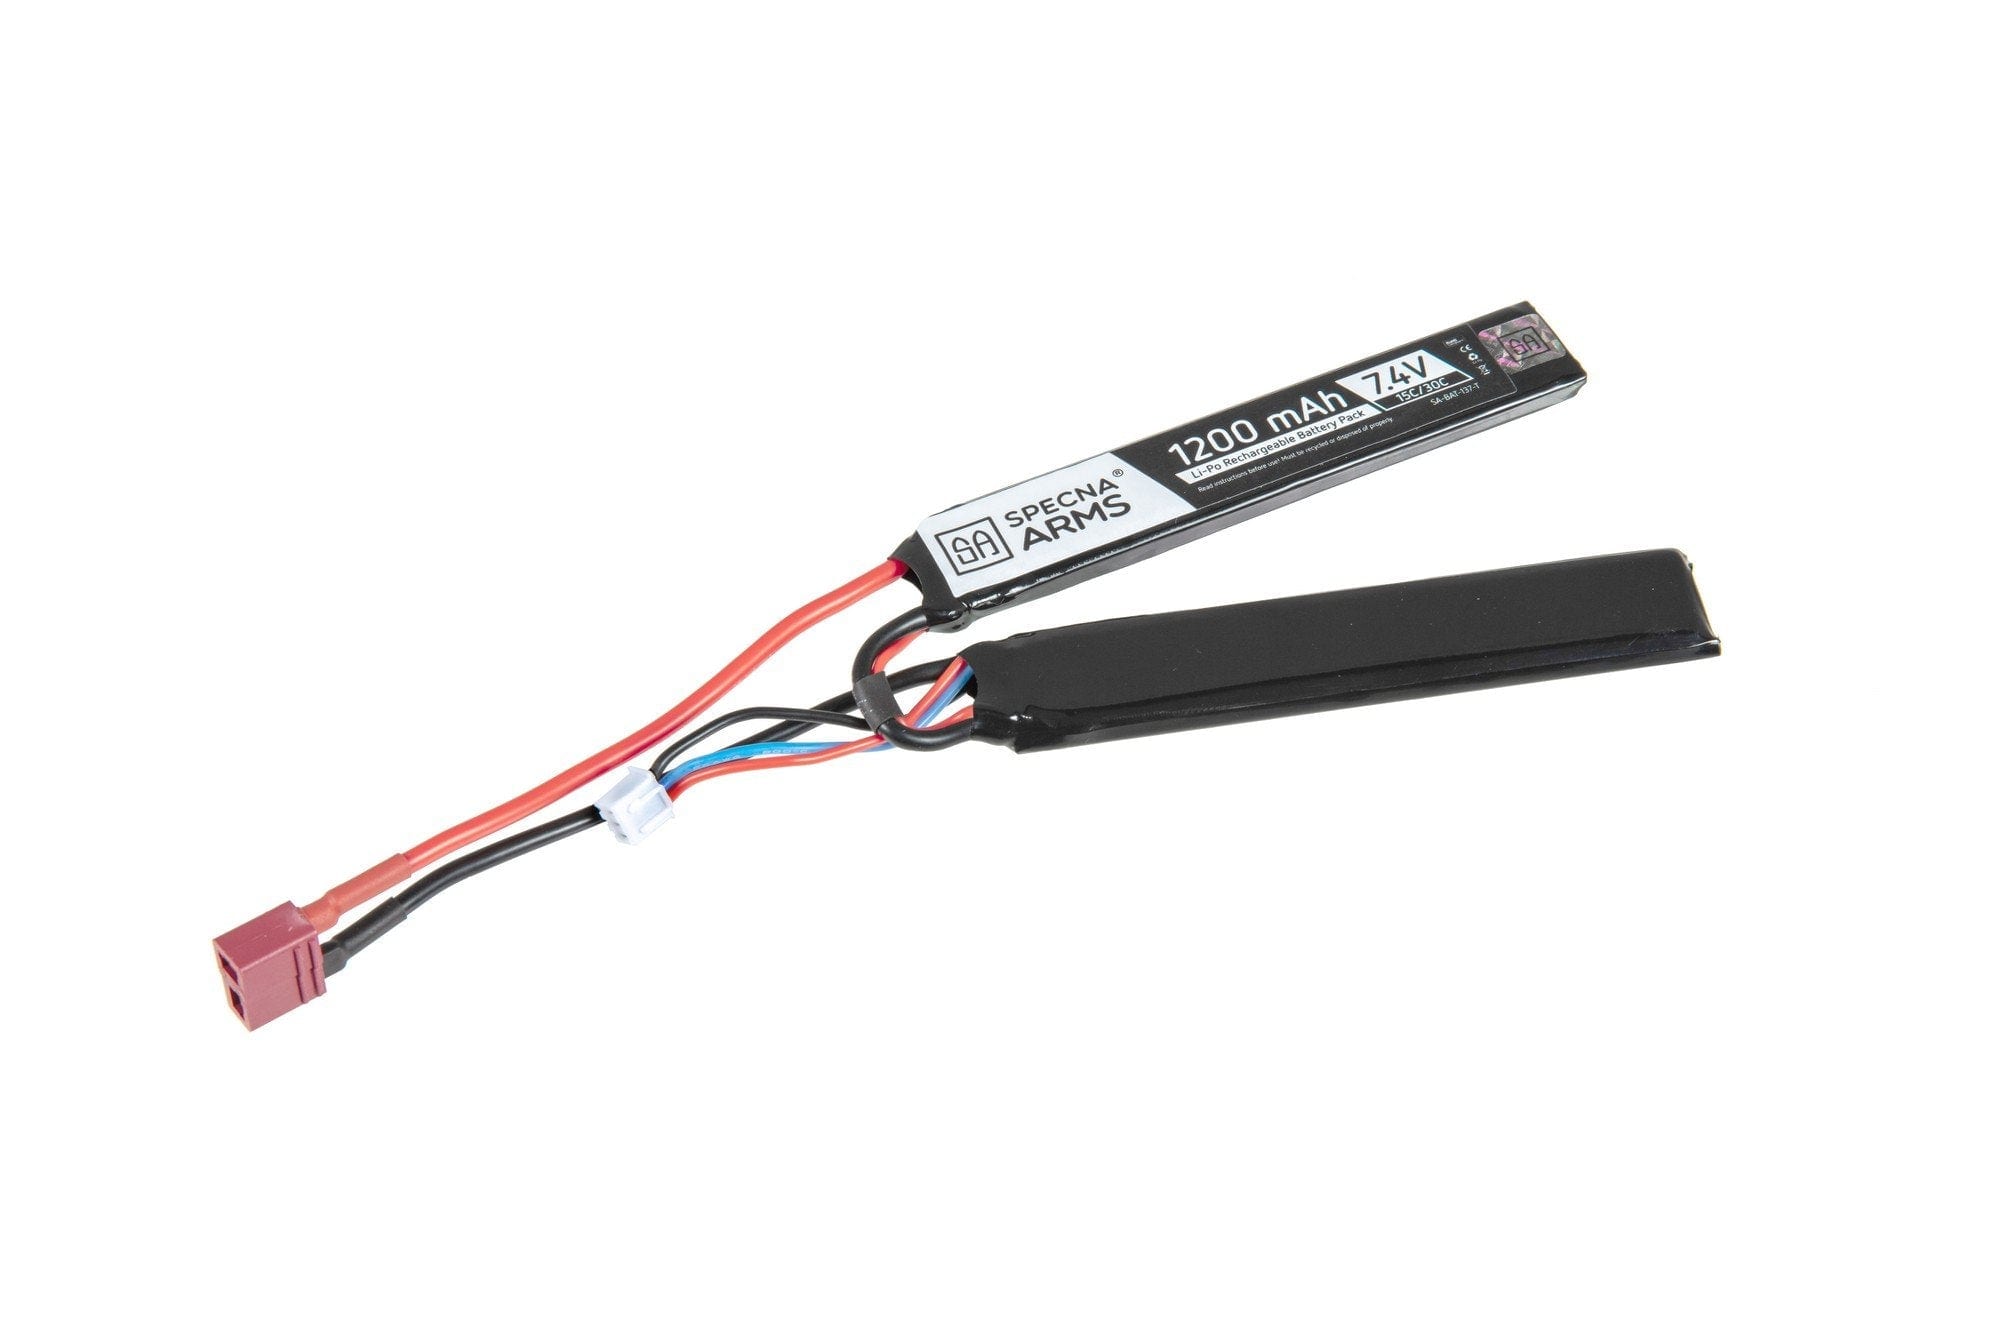 LiPo 7.4V 1200mAh 15 / 30C Battery - Butterfly Configuration - T-Connect (Deans) by Specna Arms on Airsoft Mania Europe